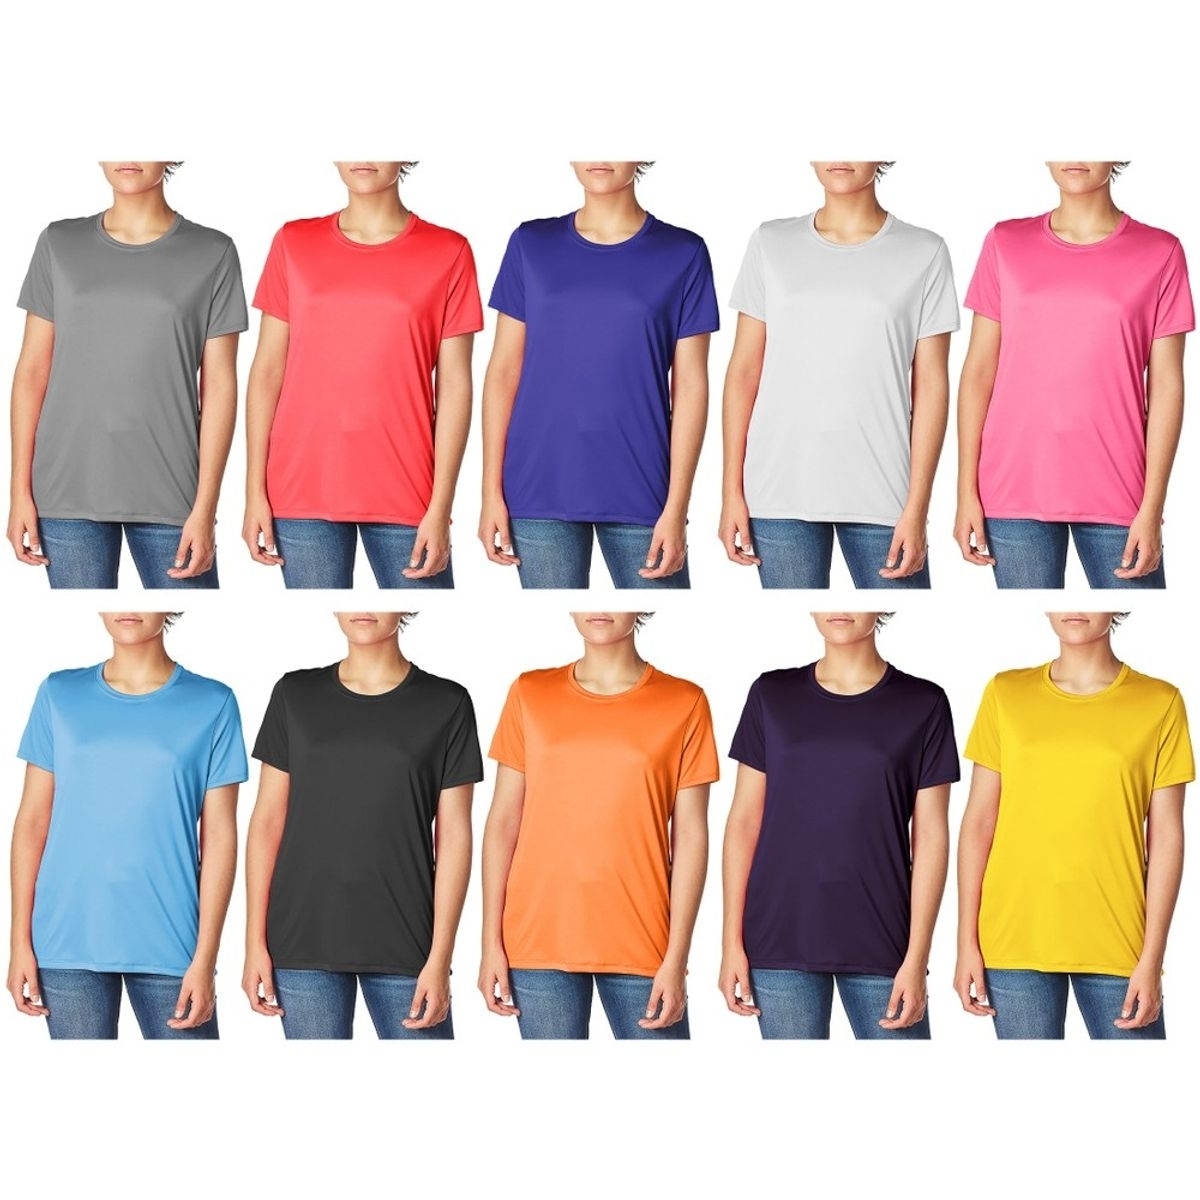 3-Pack: Women's Cool Dri-FIt Moisture Wicking Sim-Fit Long Sleeve Crew Neck T-Shirts - X-large